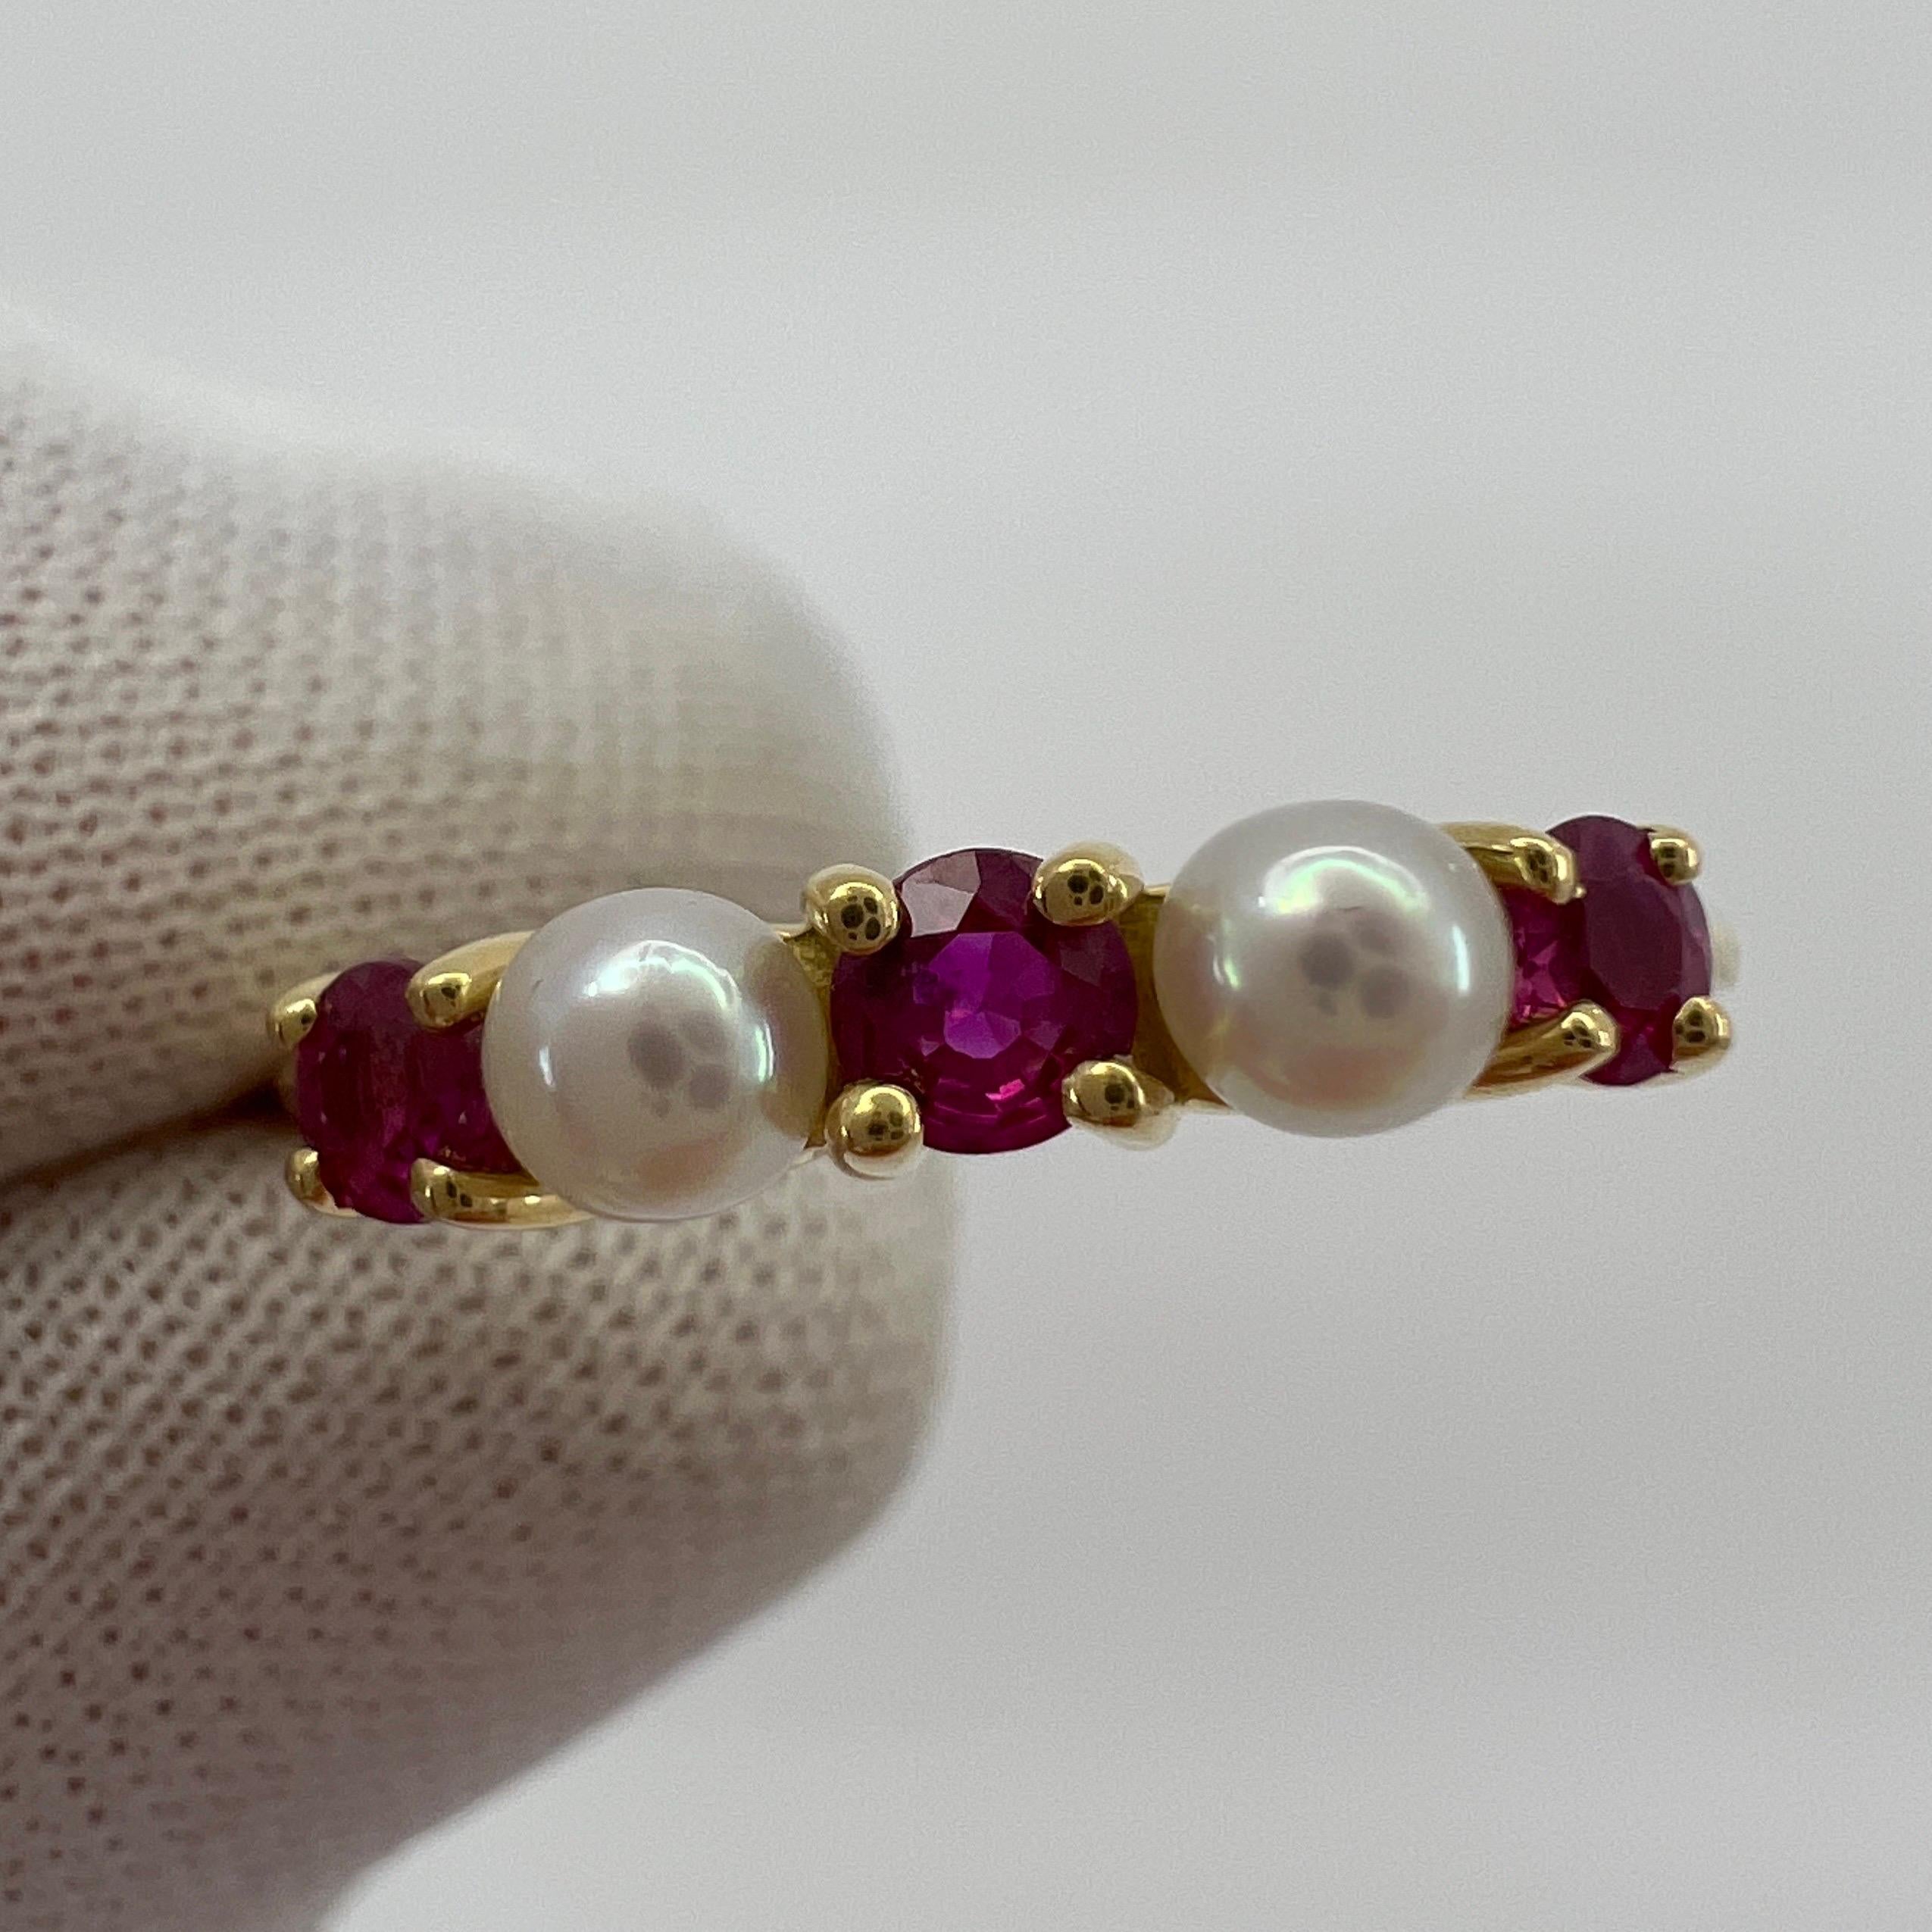 Tiffany & Co. Ruby & Pearl 18k Yellow Gold Eternity Ring.

A beautifully made yellow gold eternity ring set with three stunning 2.8mm vivid red round cut rubies. Very nice colour, clarity and cut. Also set with two 3.2mm pearls.

Fine jewellery